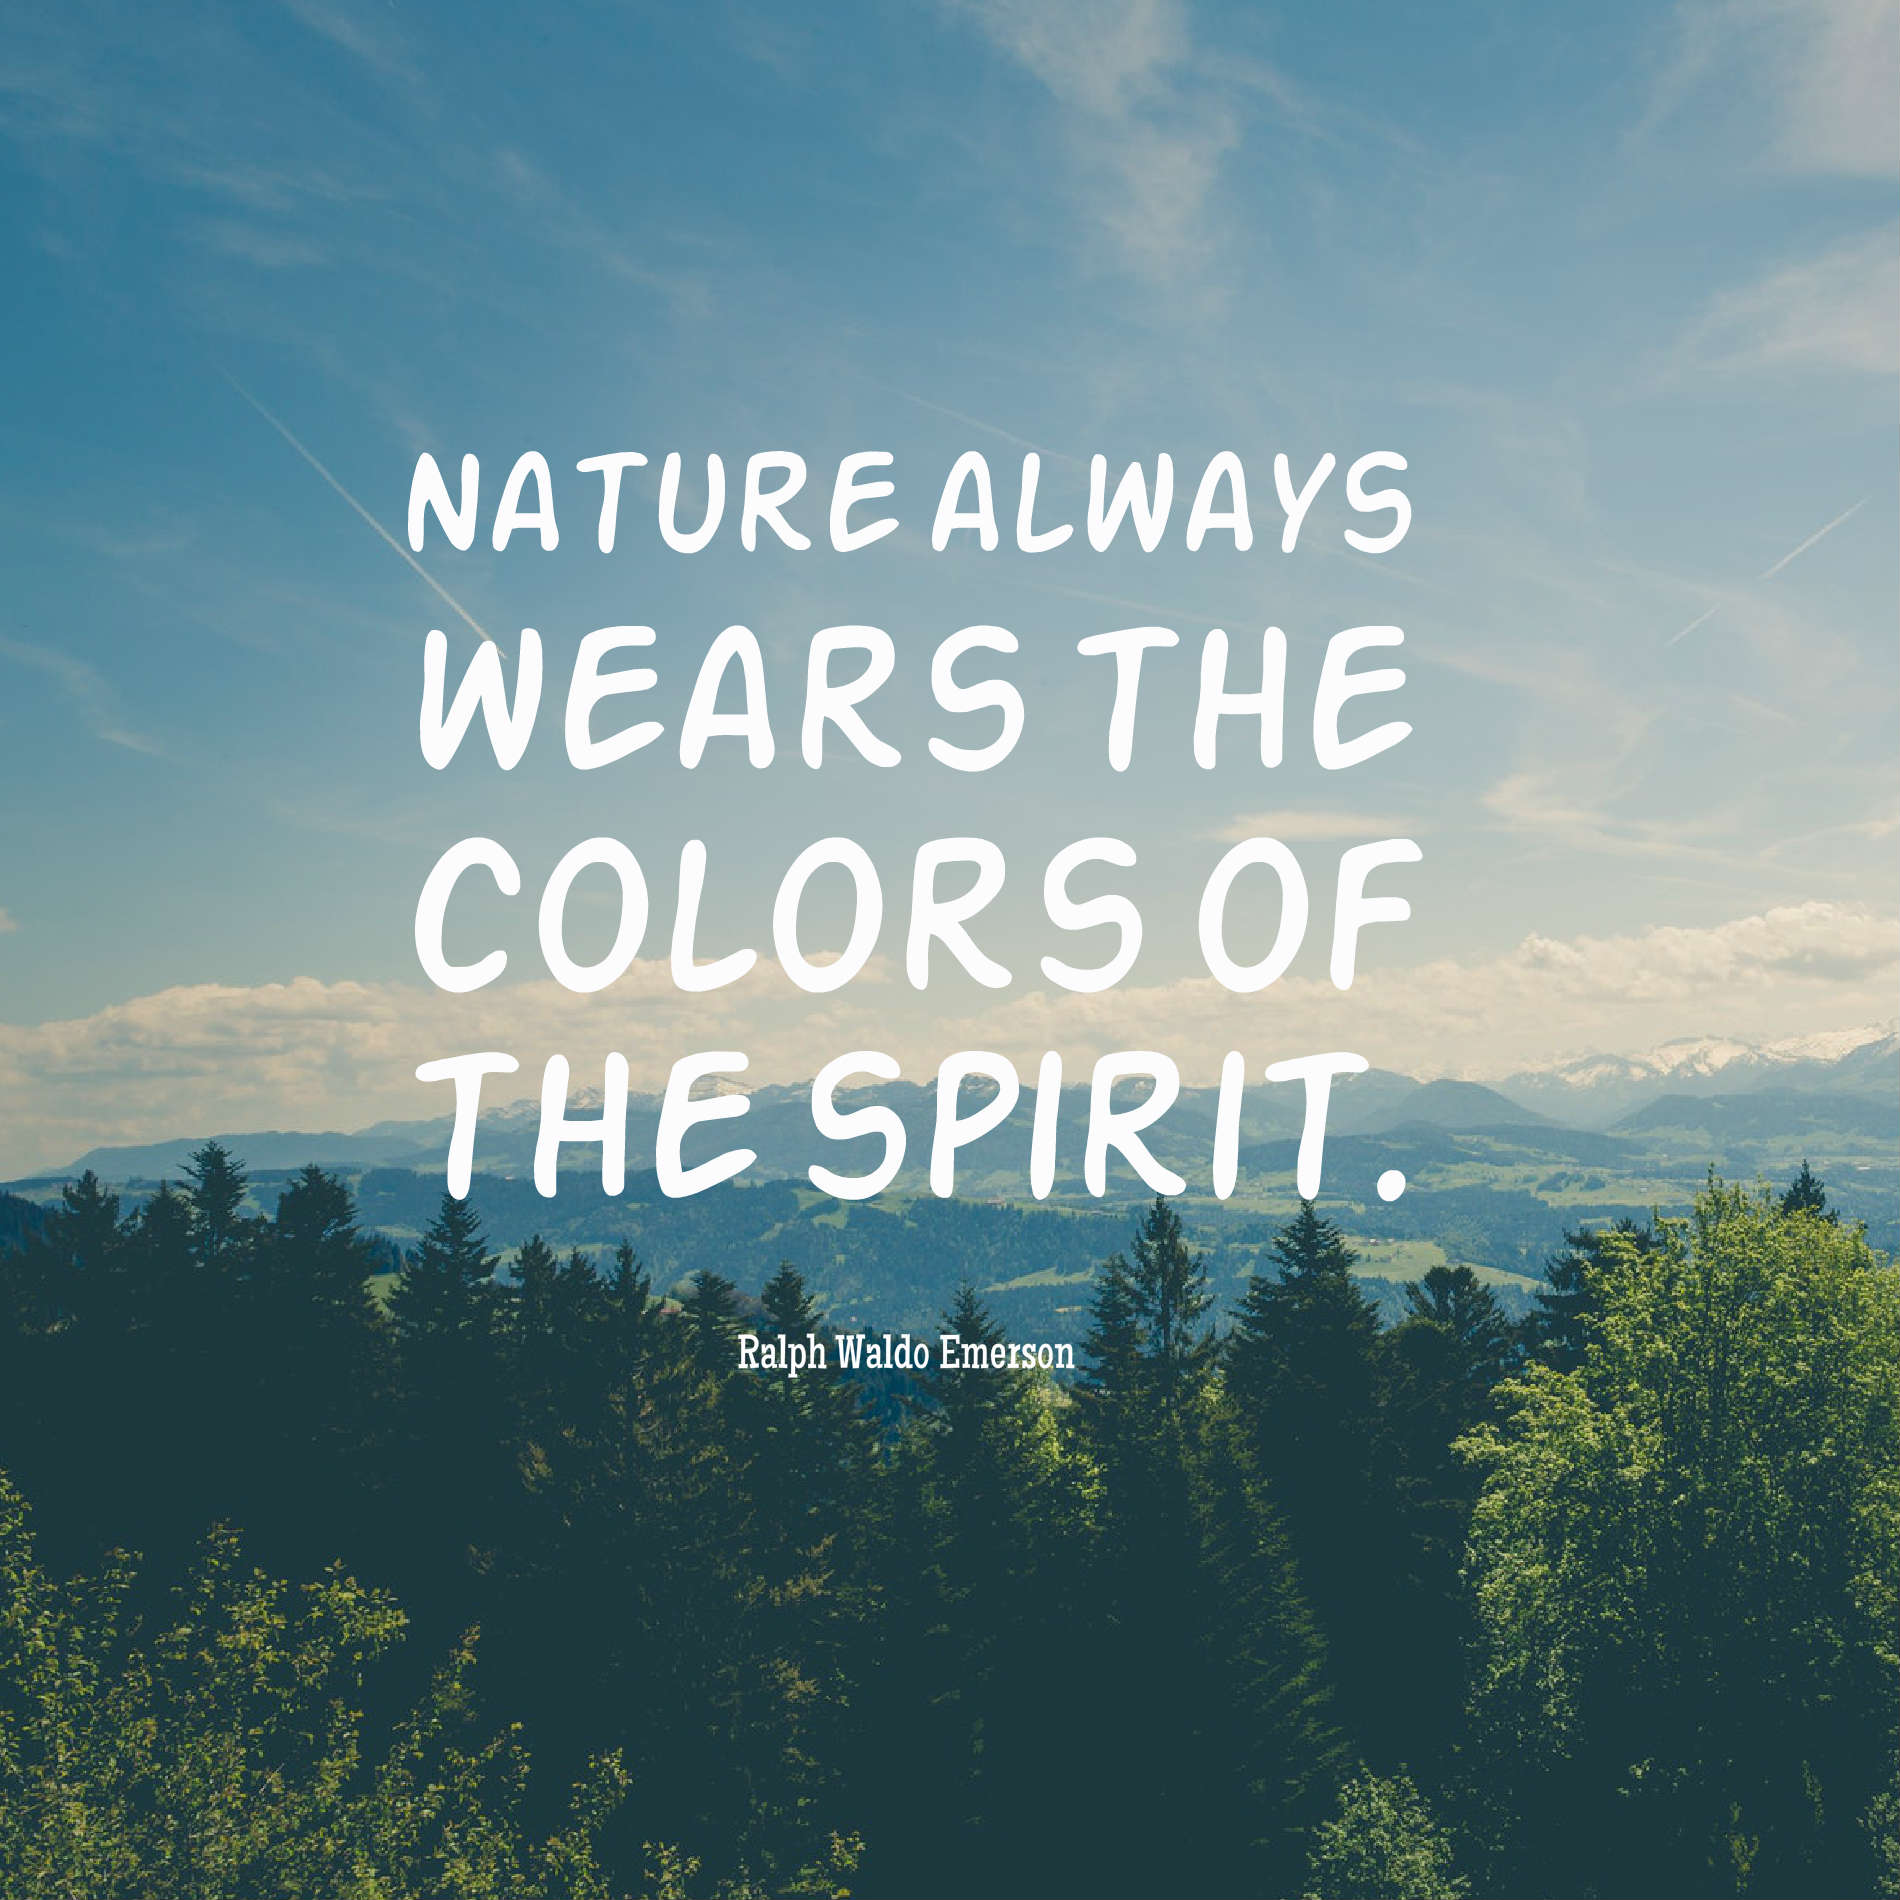 Nature always wears the colors of the spirit.